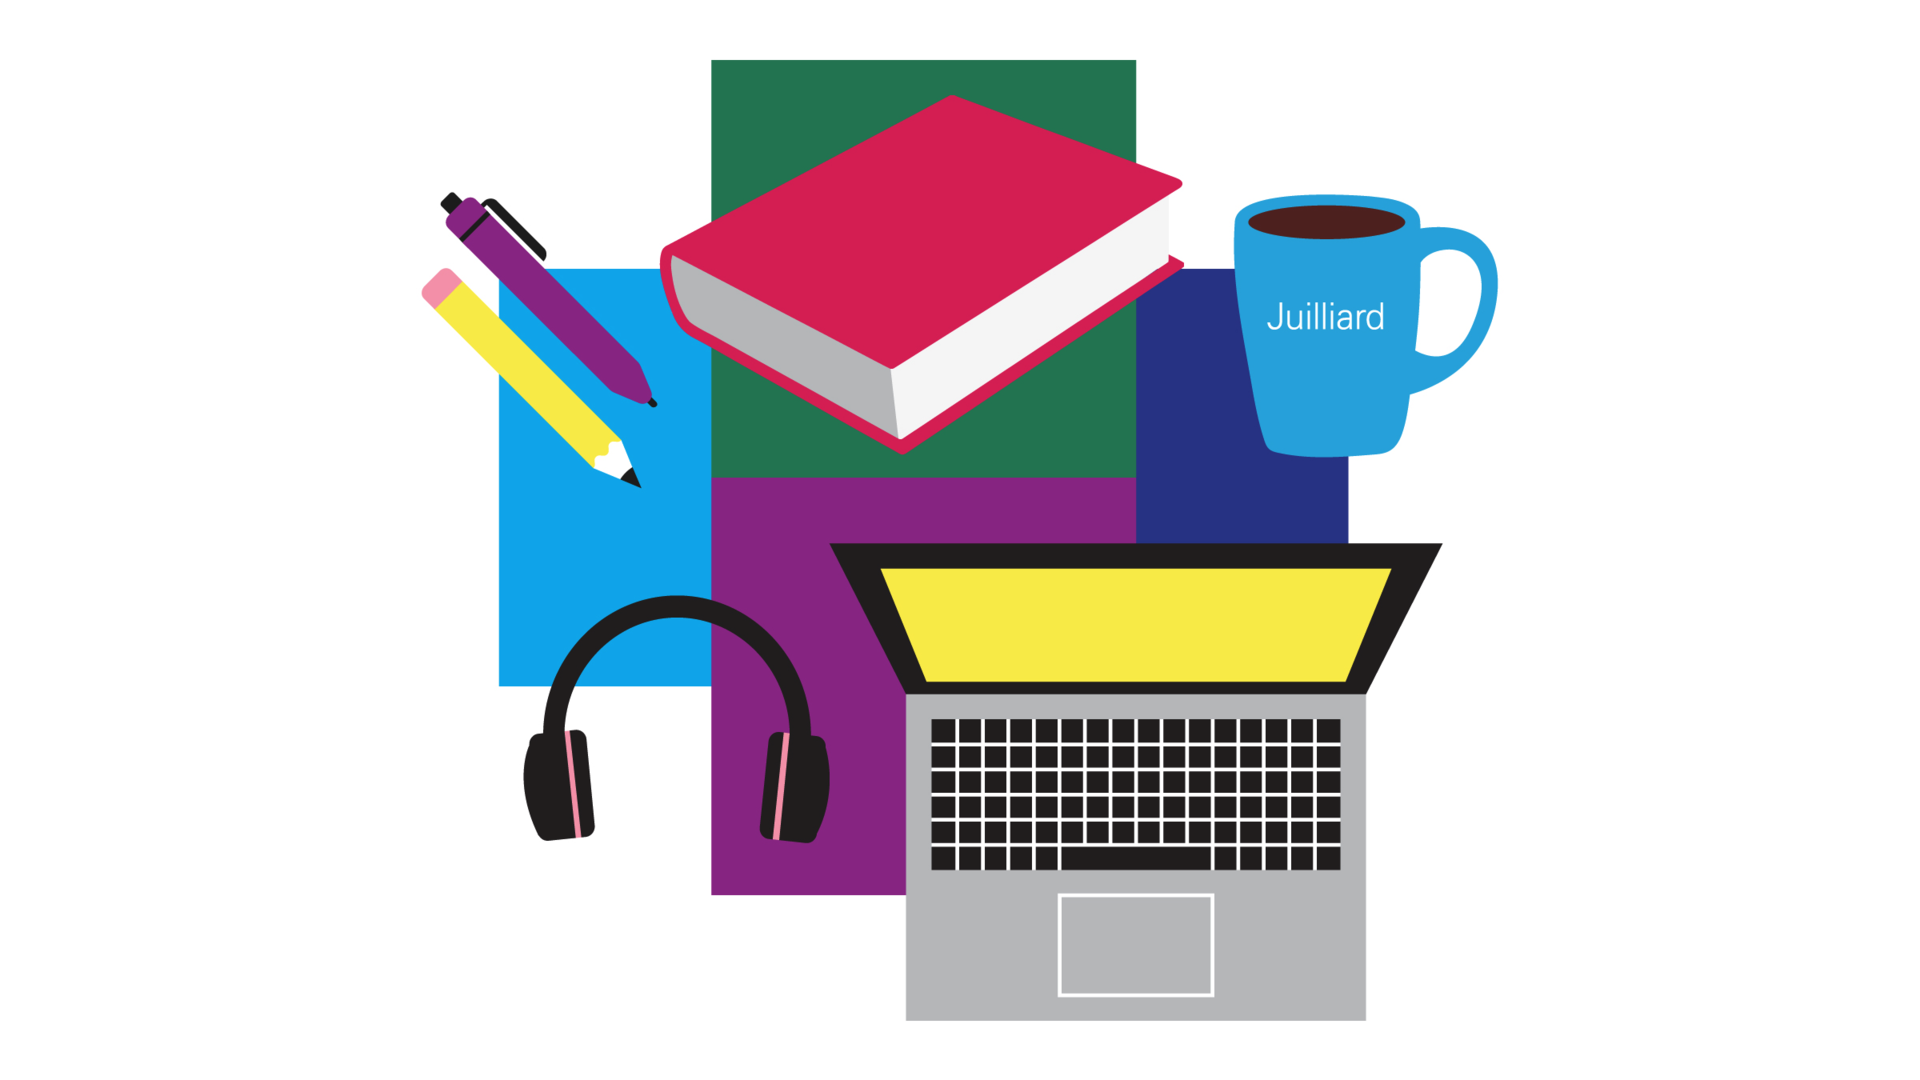 An illustration showing school supplies including books, a laptop, and a coffee mug that says "Juilliard"